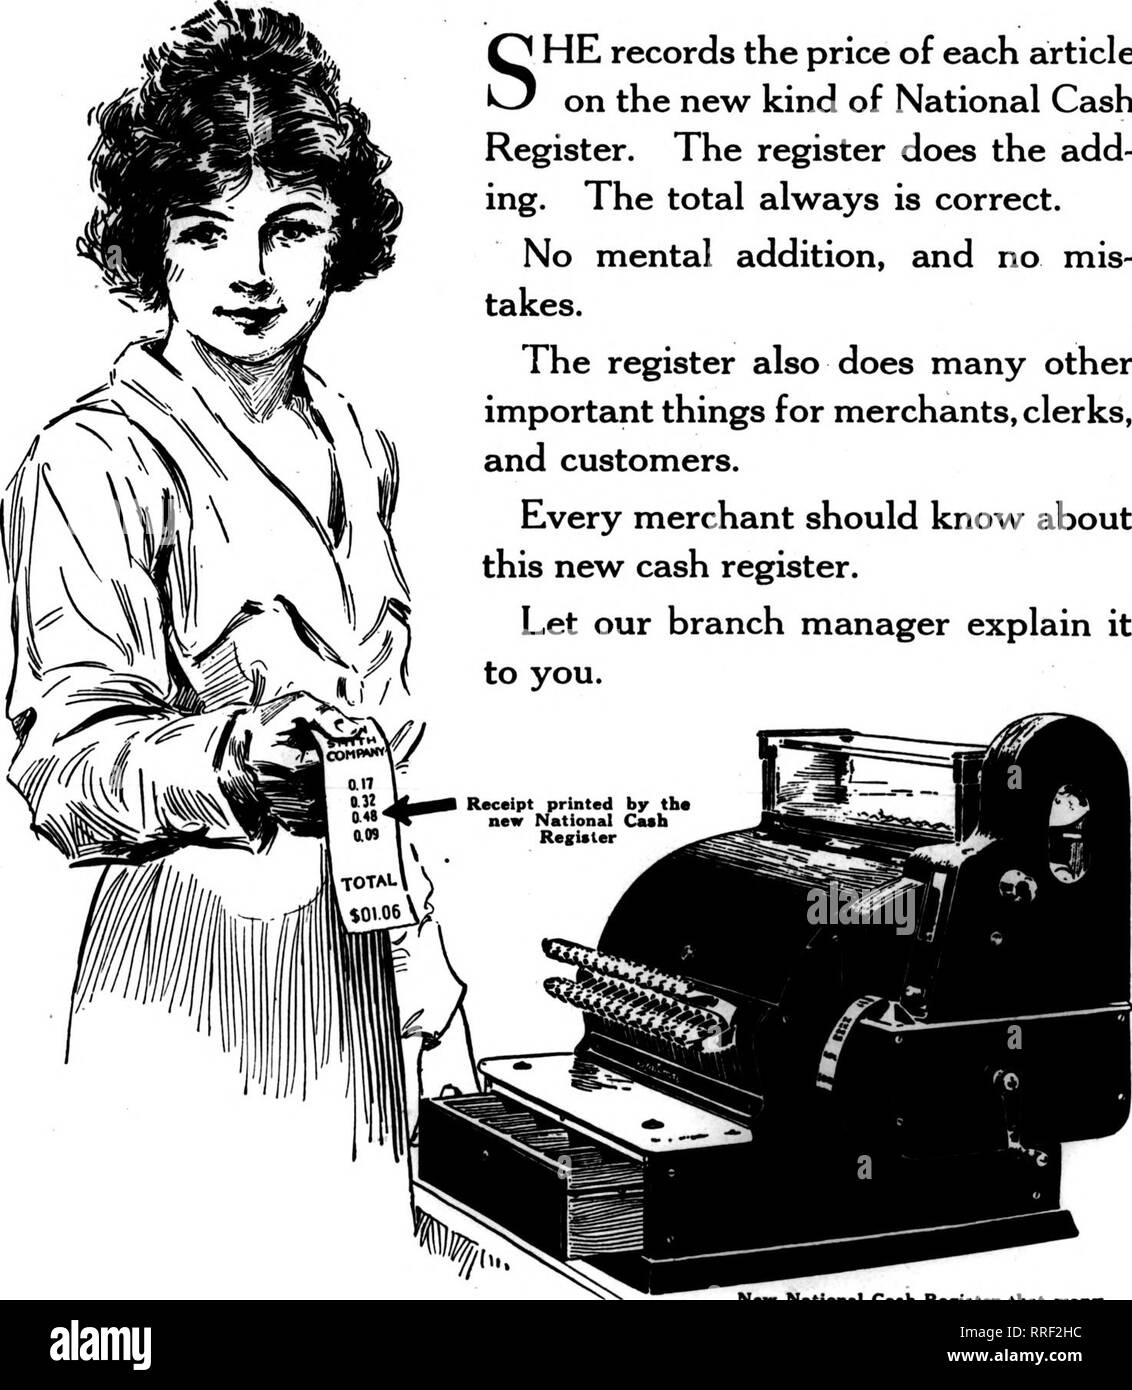 . Florists' review [microform]. Floriculture. r; OCTOBEB 14, 1020 The Florists' Review 19 This clerk makes no mistakes in adding the items of a sale. SHE records the price of each article on the new kind of National Cash Register. The register does the add- ing. The total always is correct. No mental addition, and no mis- takes. The register also does many other important things for merchants, clerks, and customers. Every merchant should know about this new^ cash register. Let our branch manager explain it to you. New National Cash Register that man^ merchants have been looking for L ^make cas Stock Photo